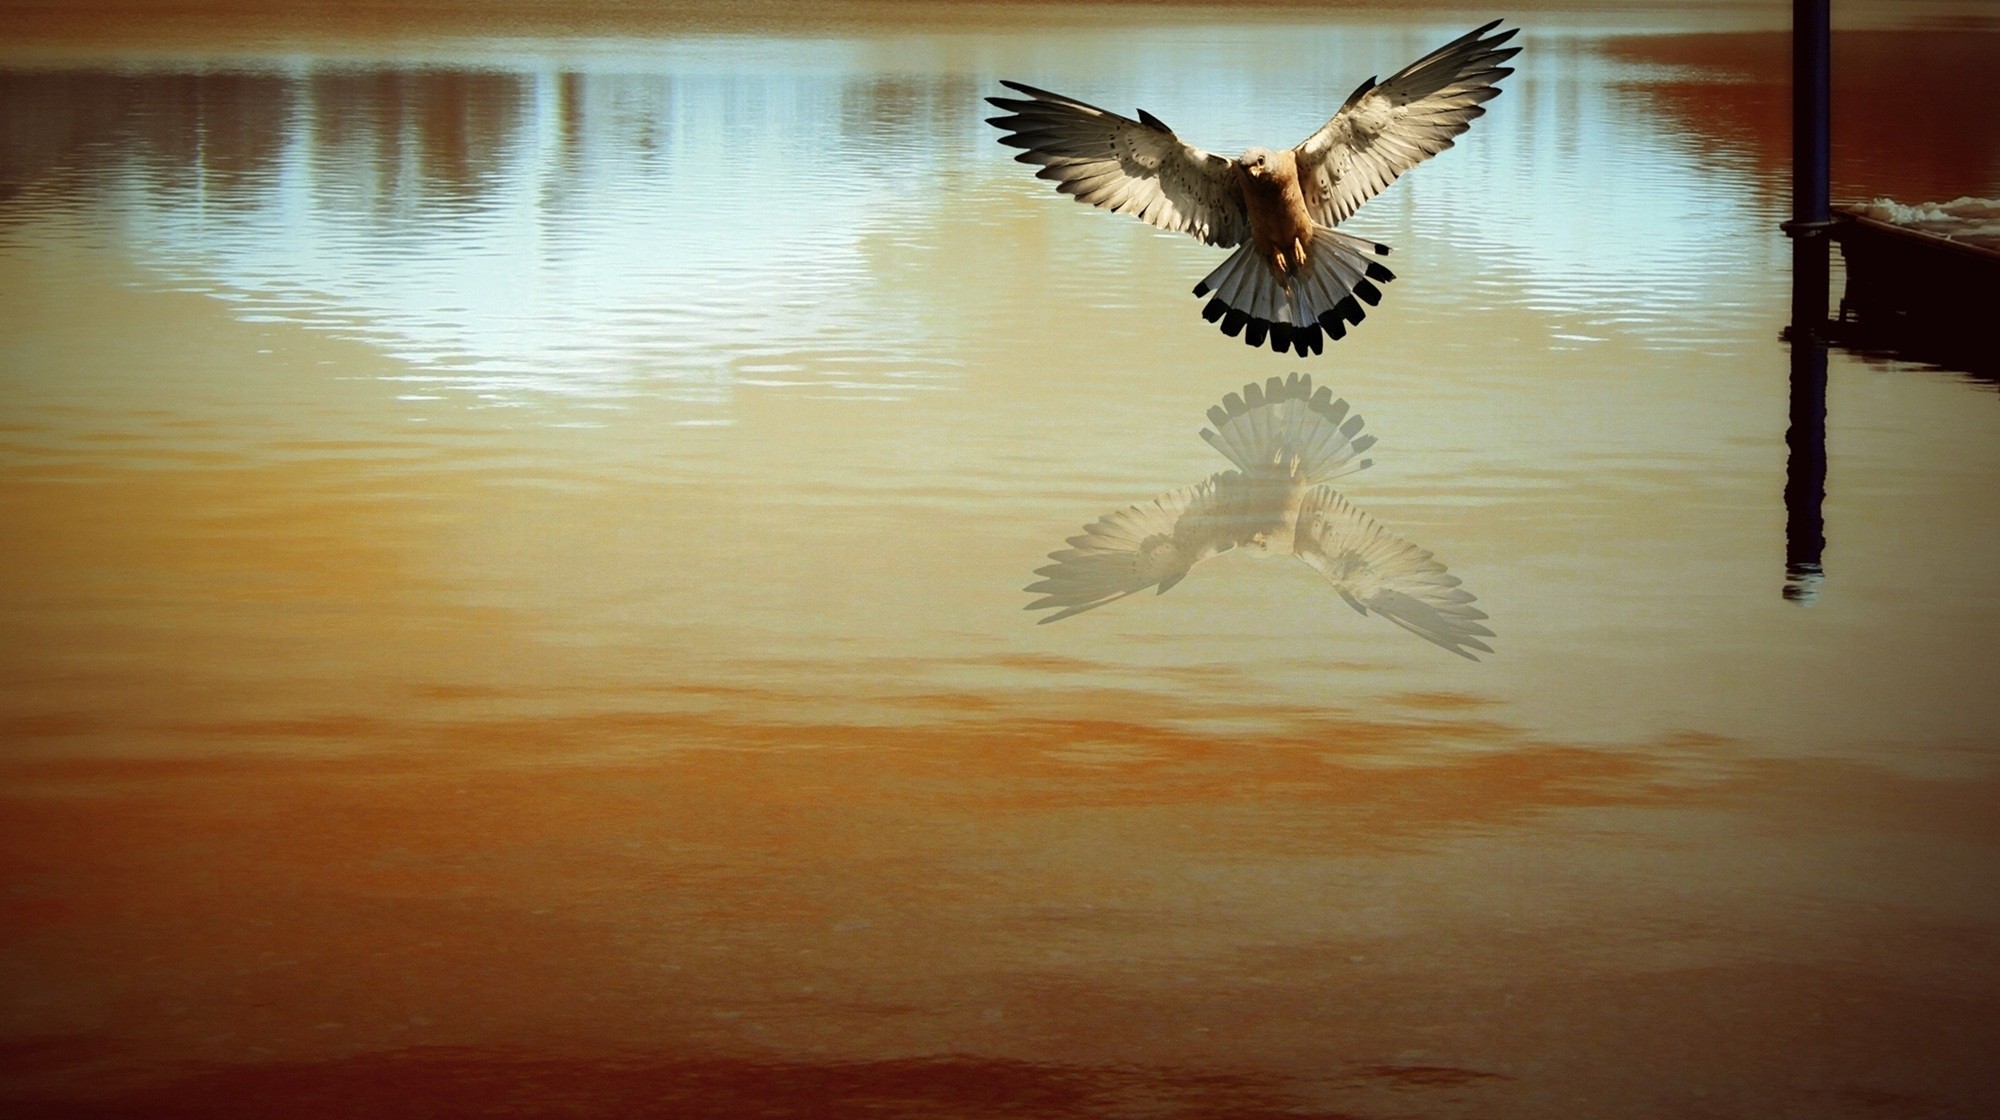 General 2000x1120 photo manipulation water animals reflection nature birds outdoors